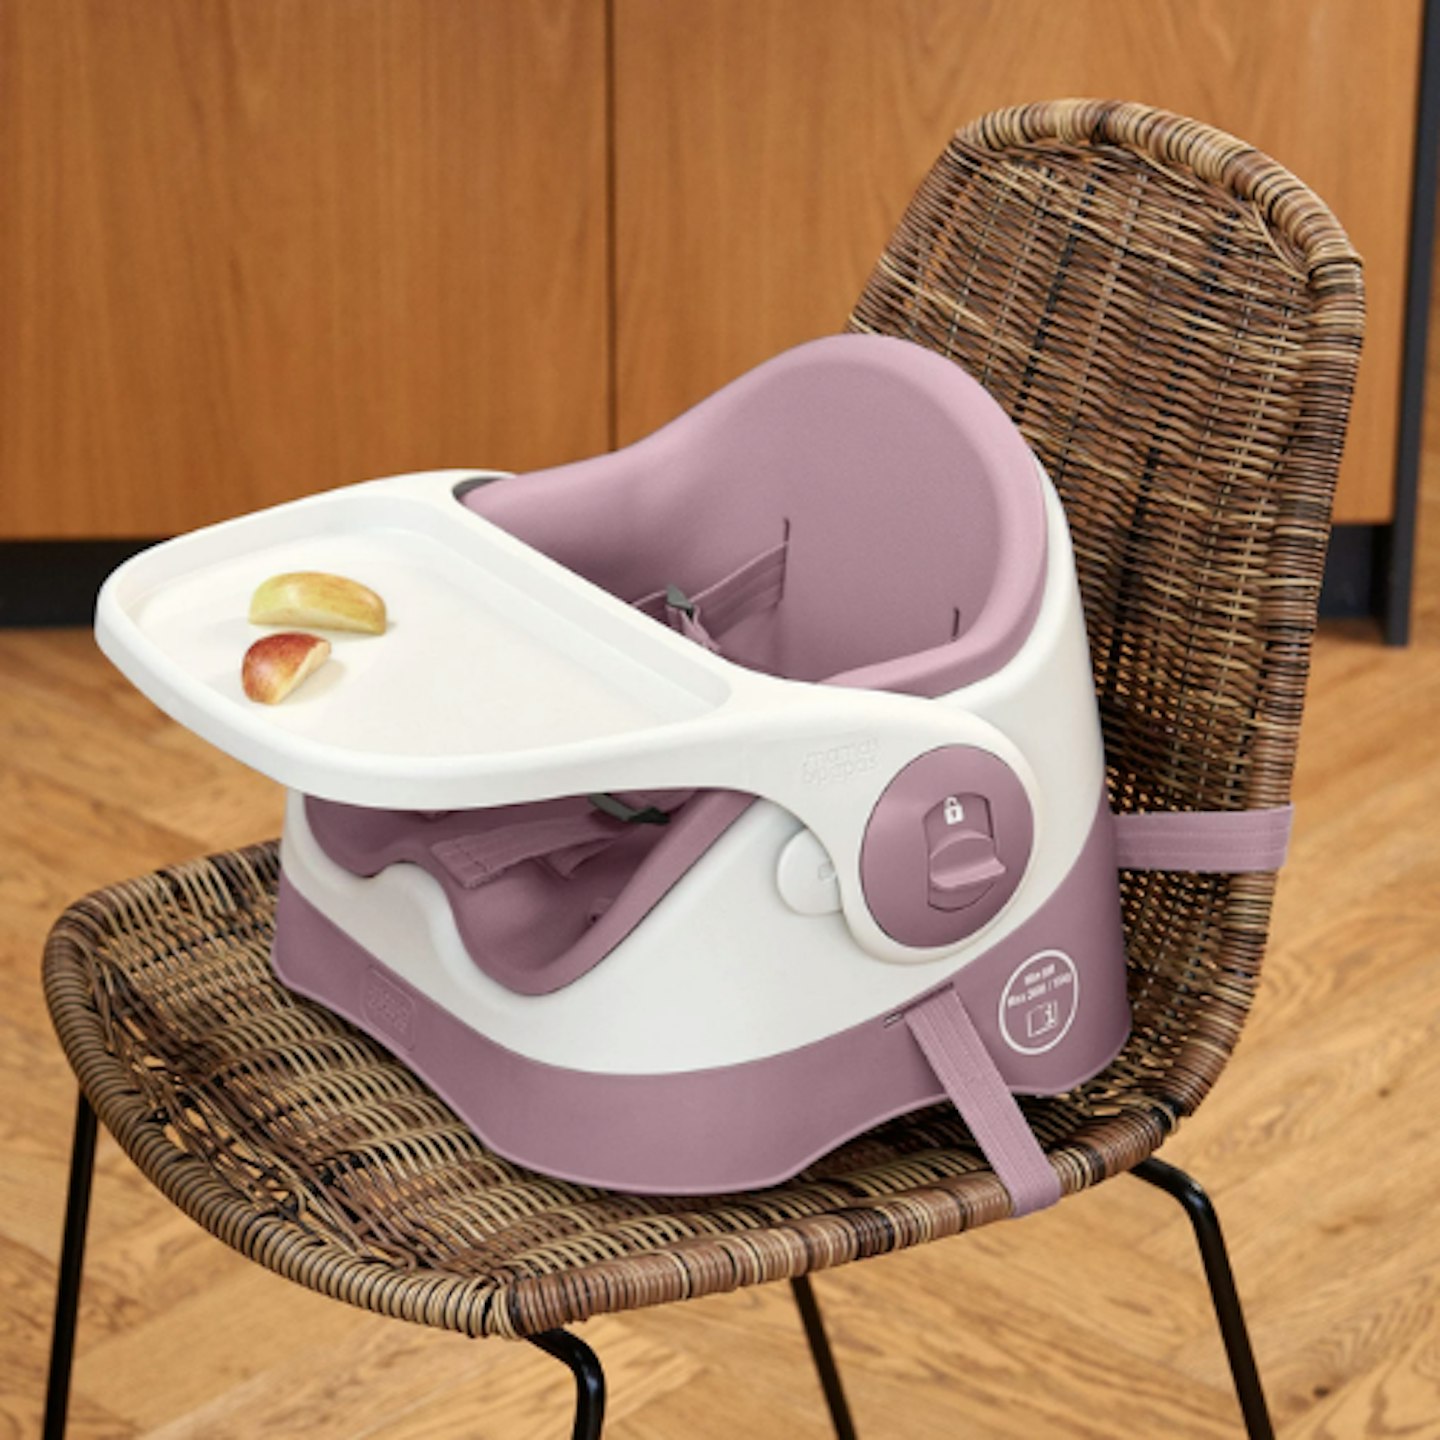 https://images.bauerhosting.com/affiliates/sites/12/motherandbaby/2021/12/Baby-Bud-Booster-Seat-with-Detachable-Tray-.png?auto=format&w=1440&q=80